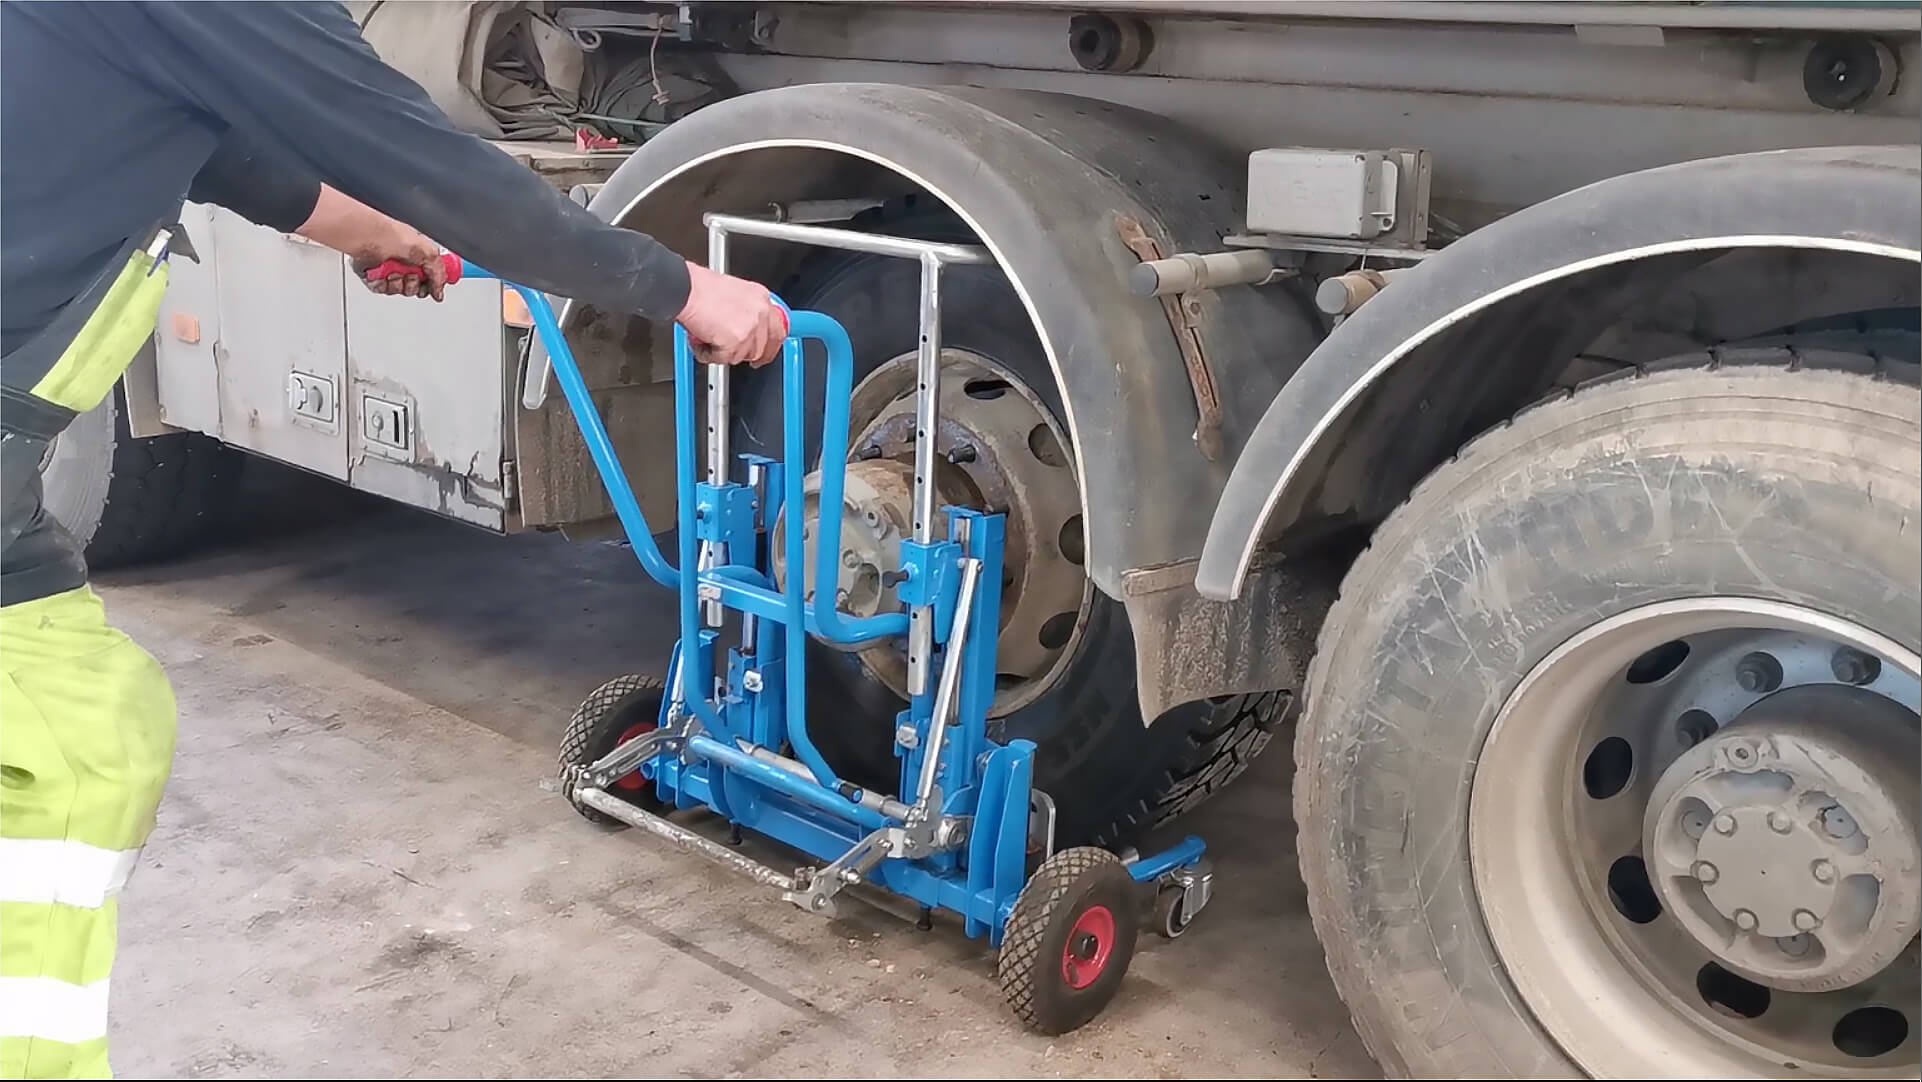 Easy Truck Trolley reduces manual and stressful operations